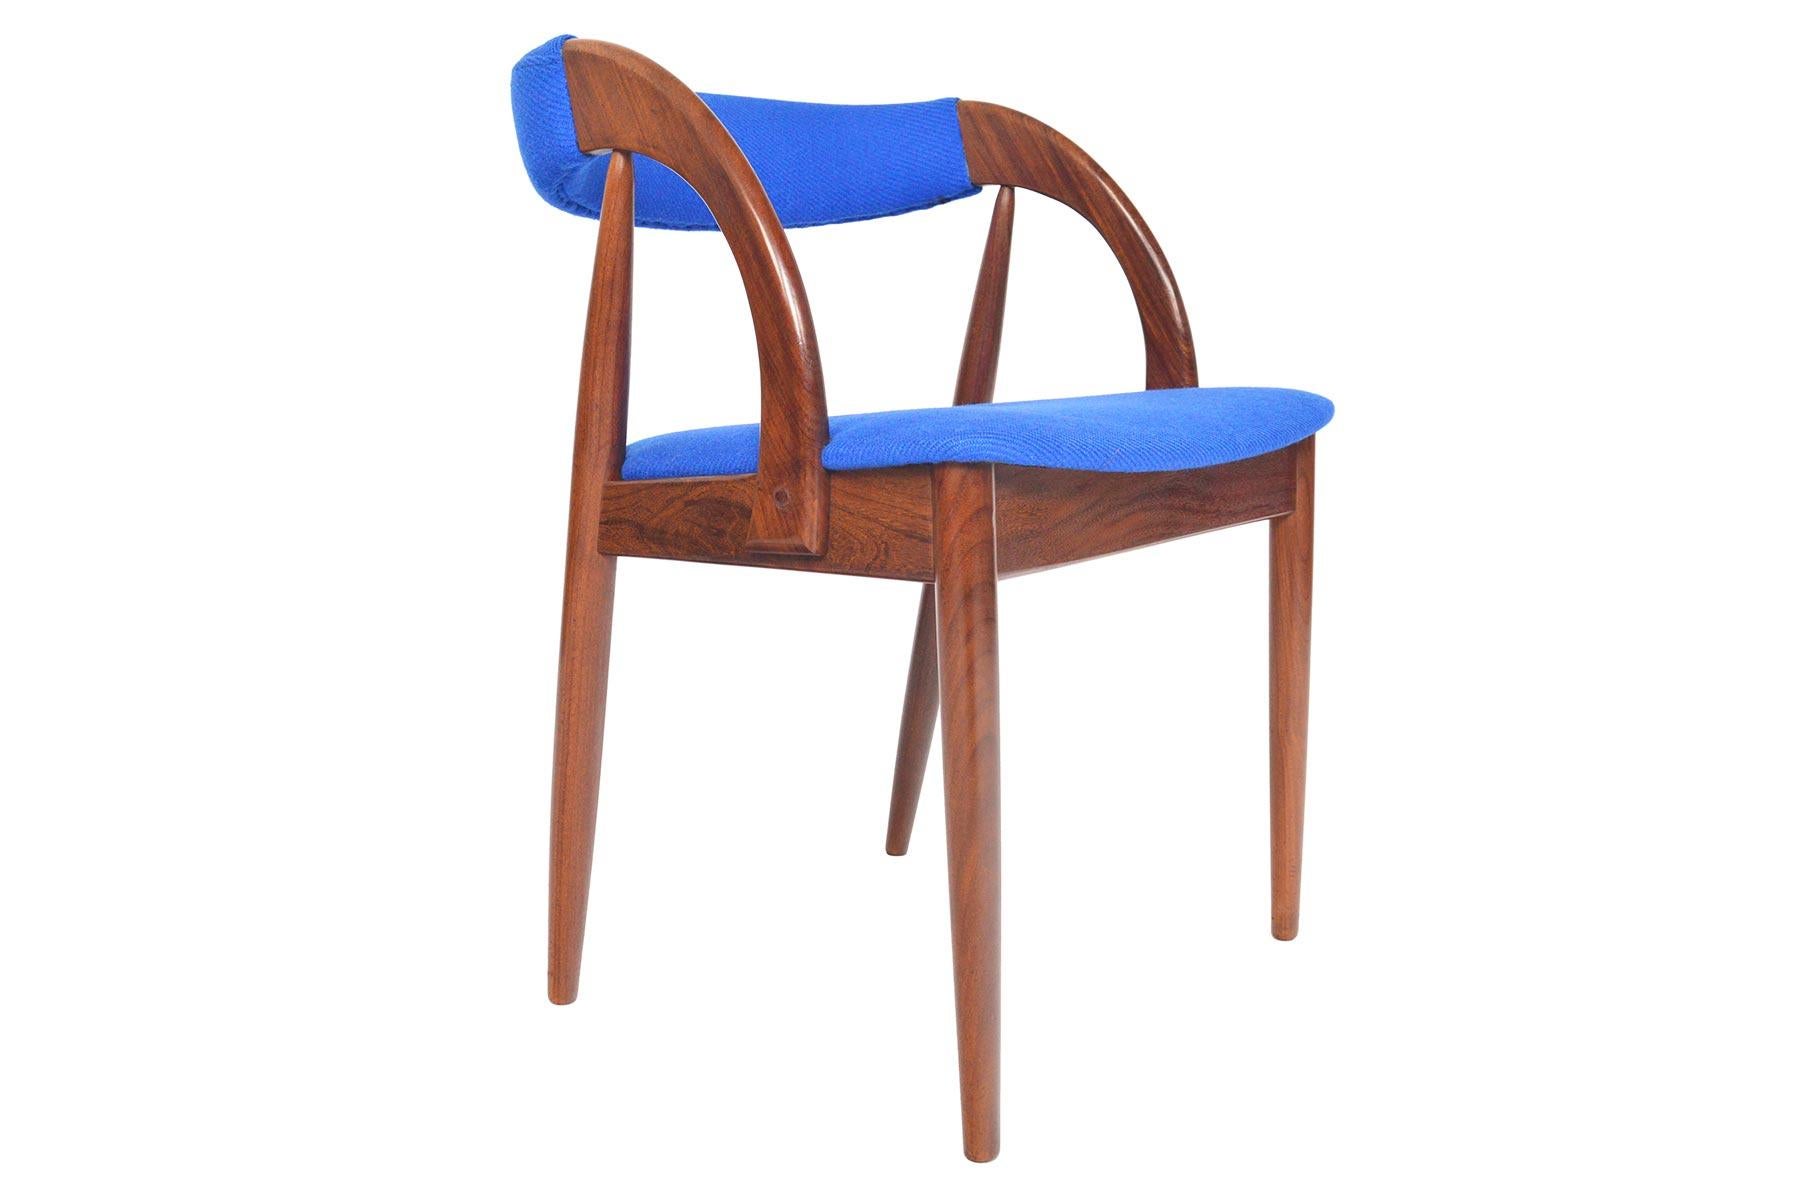 Elegant and exceedingly comfortable, this set of six Danish midcentury walnut dining chairs is the perfect companion for any modern dining room. Sculpted walnut creates a stunning profile from the side and wraps around to offer an upholstered